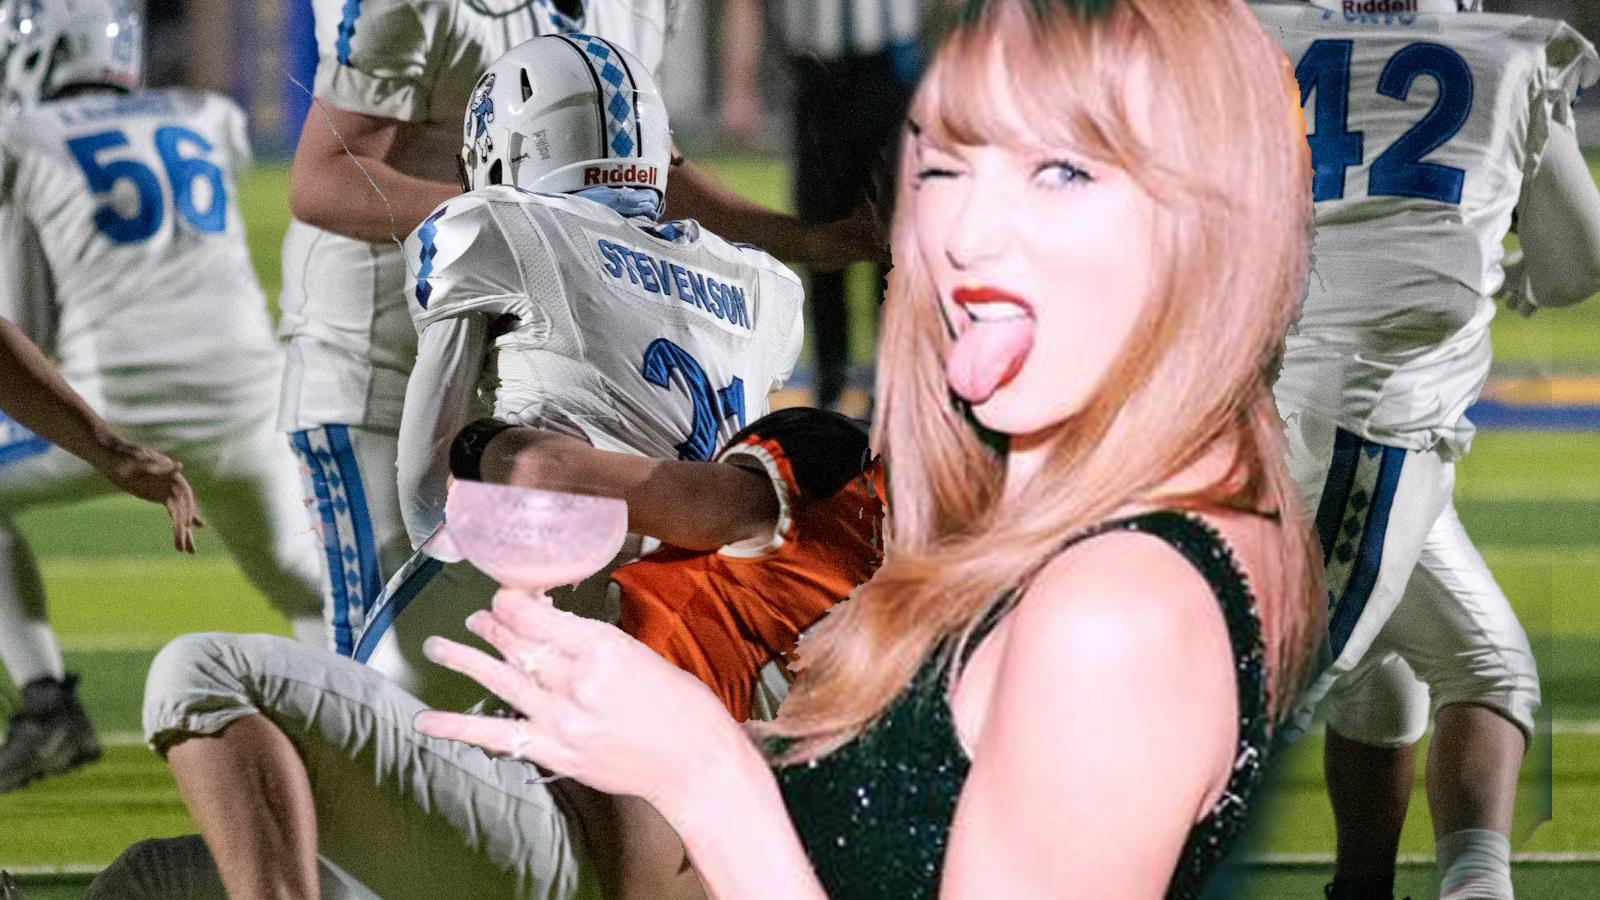 Sports lovers thank Taylor Swift for increasing her fans' interest in NFL